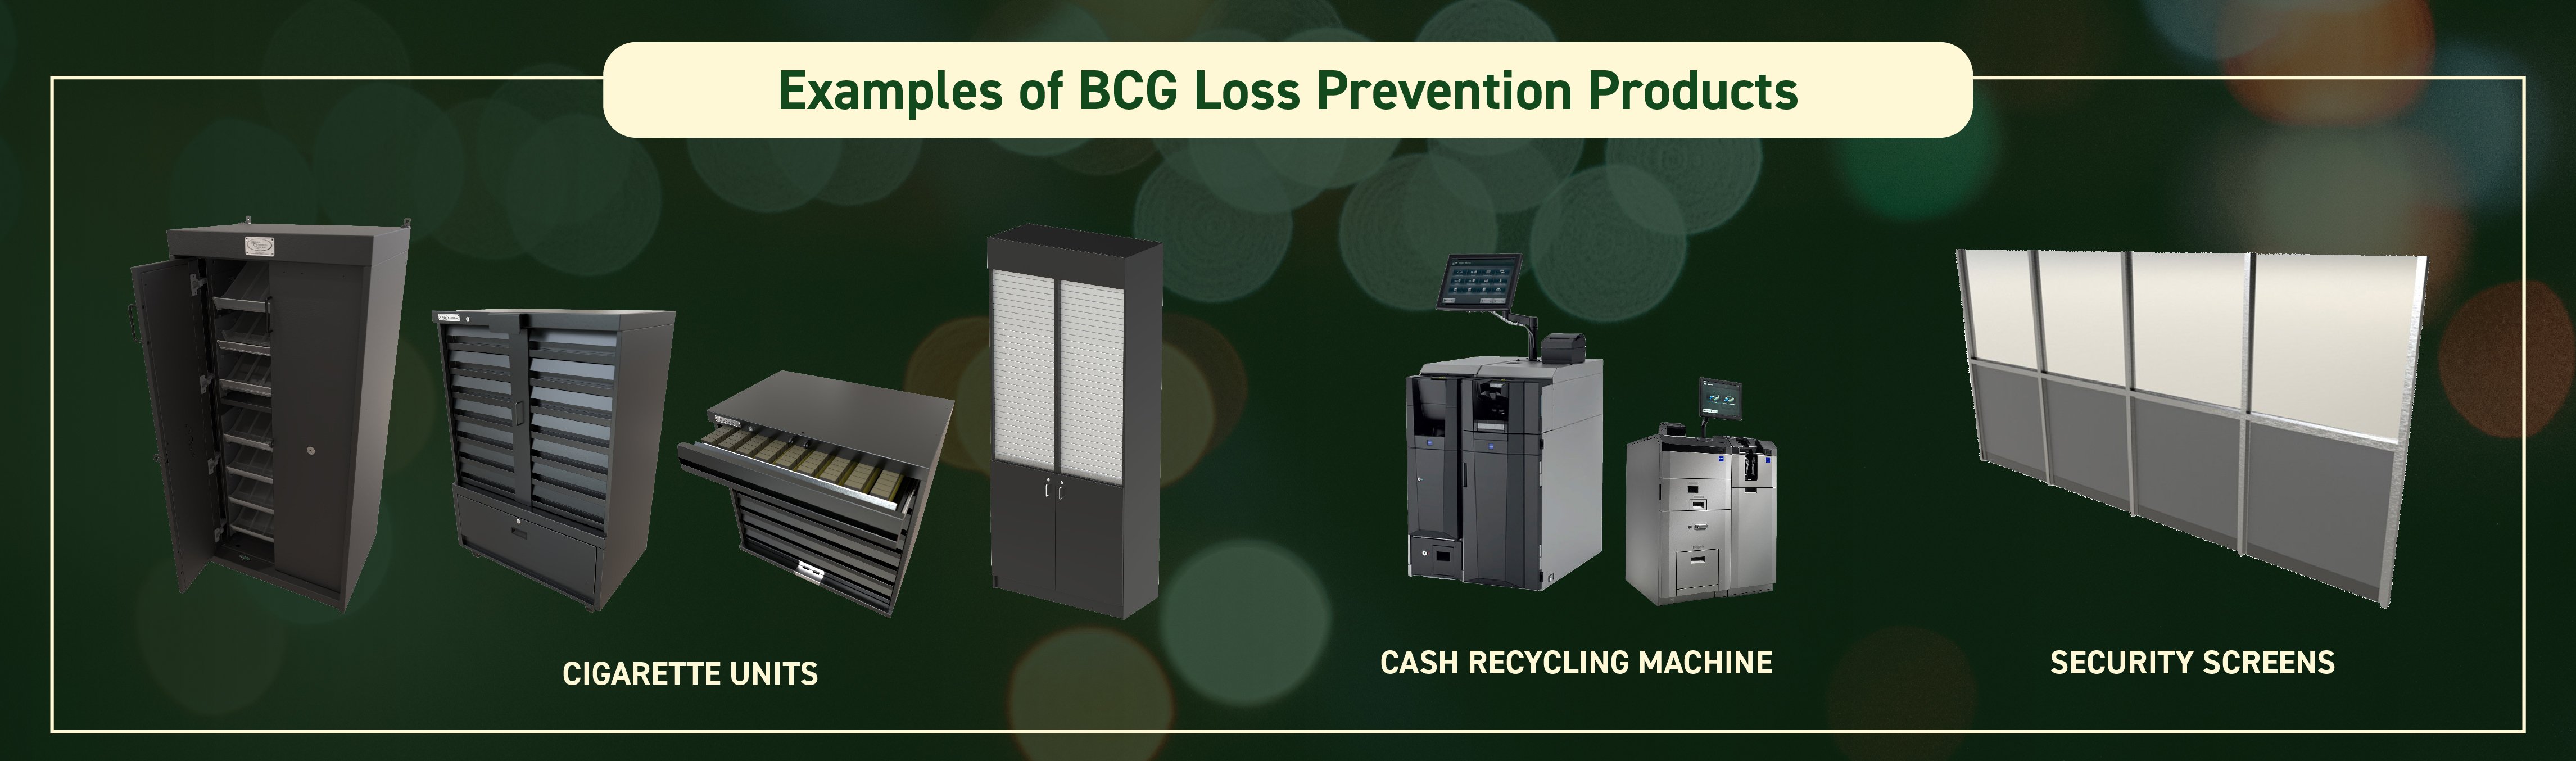 BCG-Examples-of-Loss-Prevention-Products